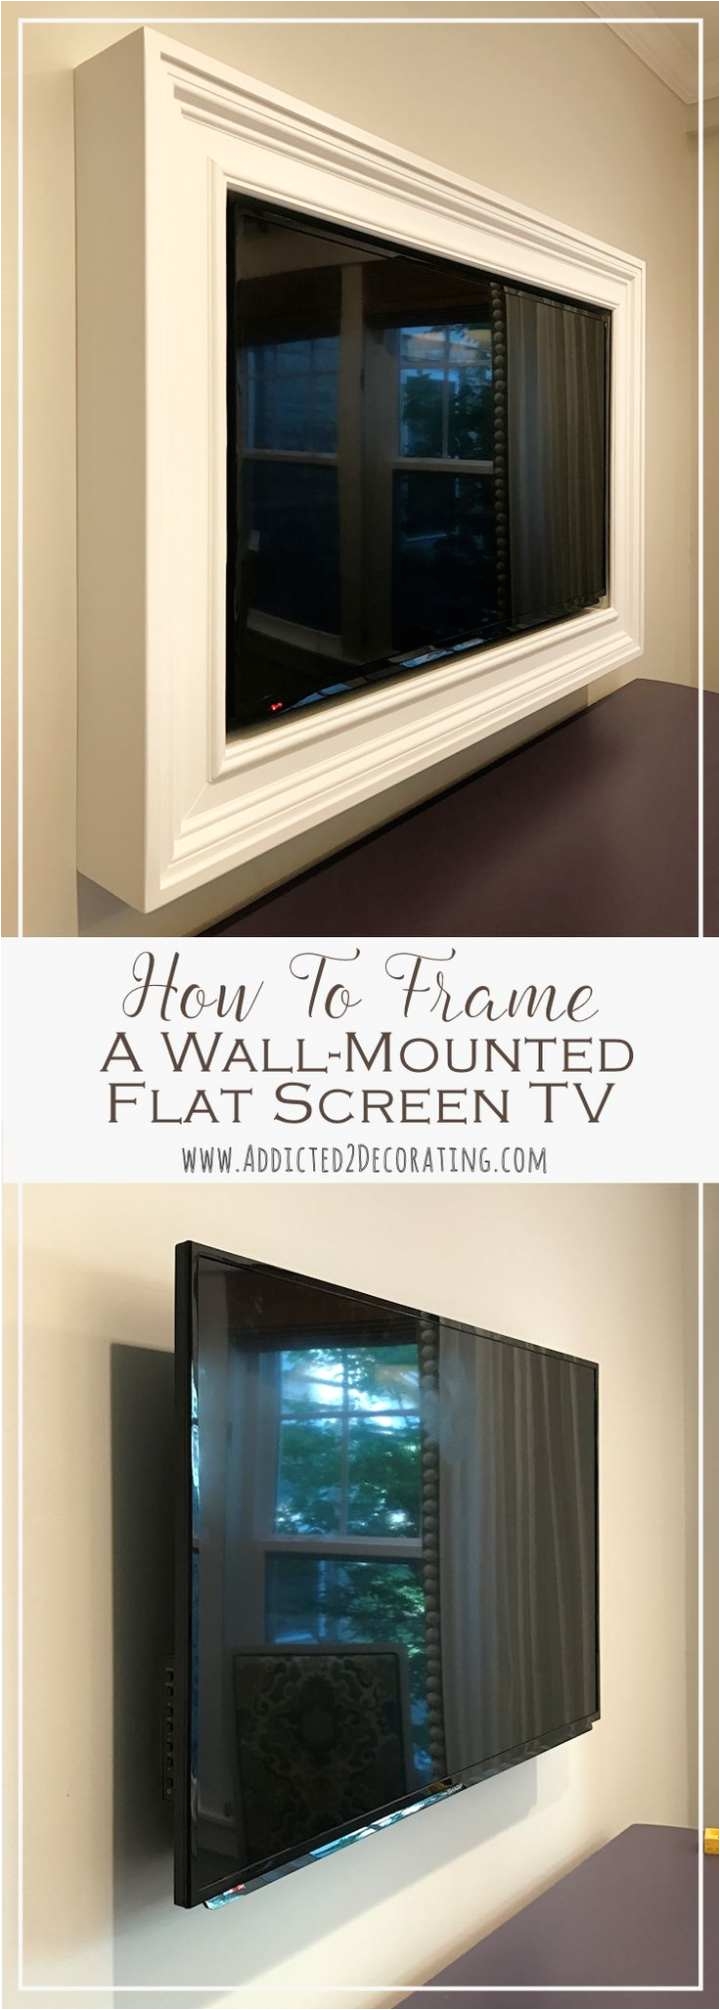 custom diy frame for wall mounted tv finished bloggers best diy crafts and recipes pinterest